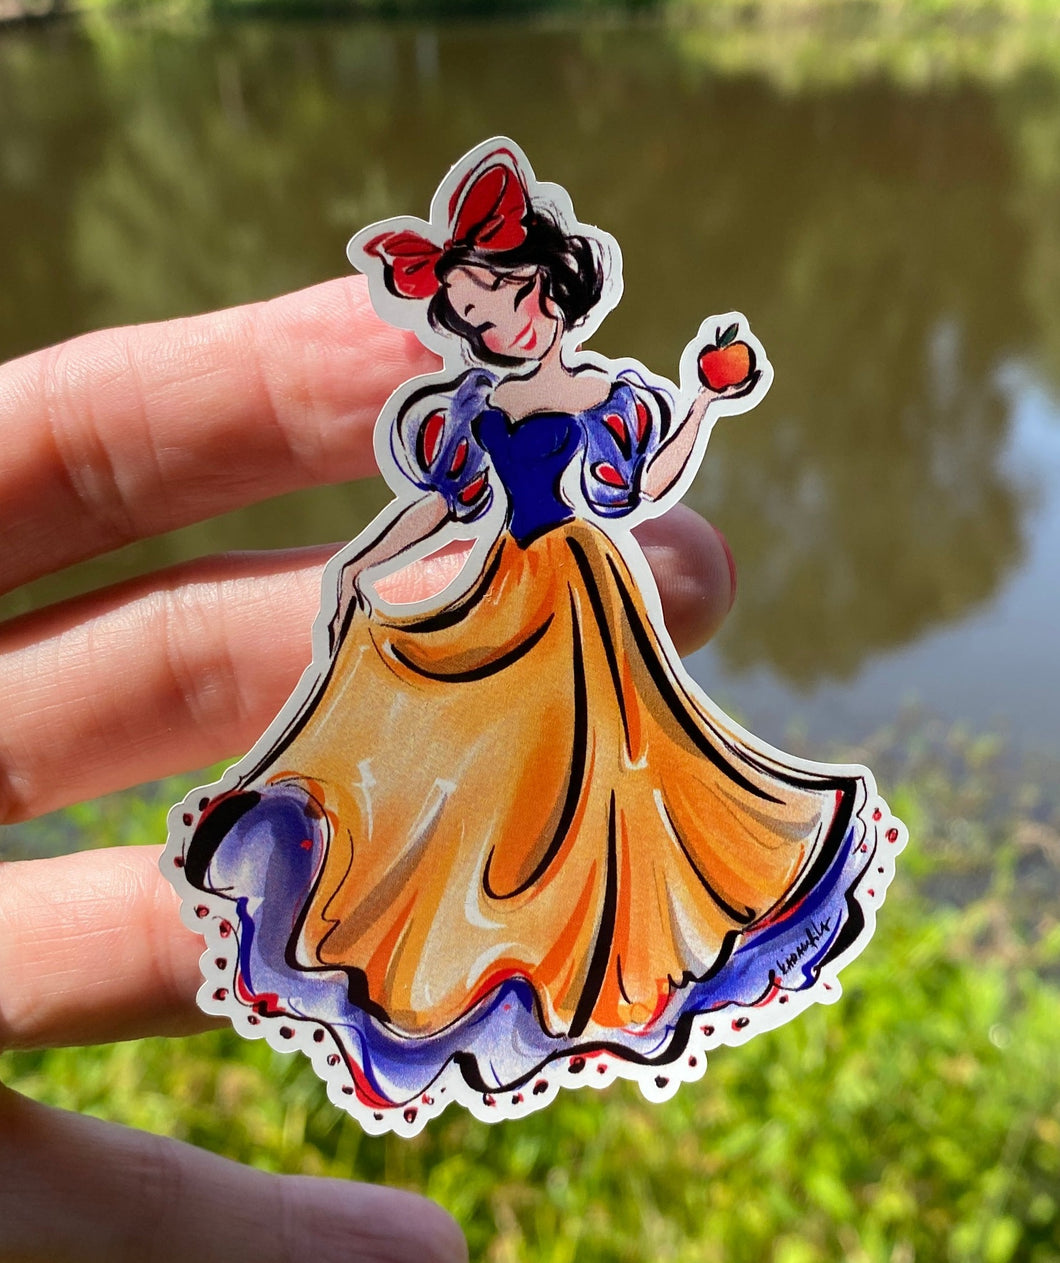 Sticker | 39K | Snow White | Waterproof Vinyl Sticker | White | Clear | Permanent | Removable | Window Cling | Glitter | Holographic